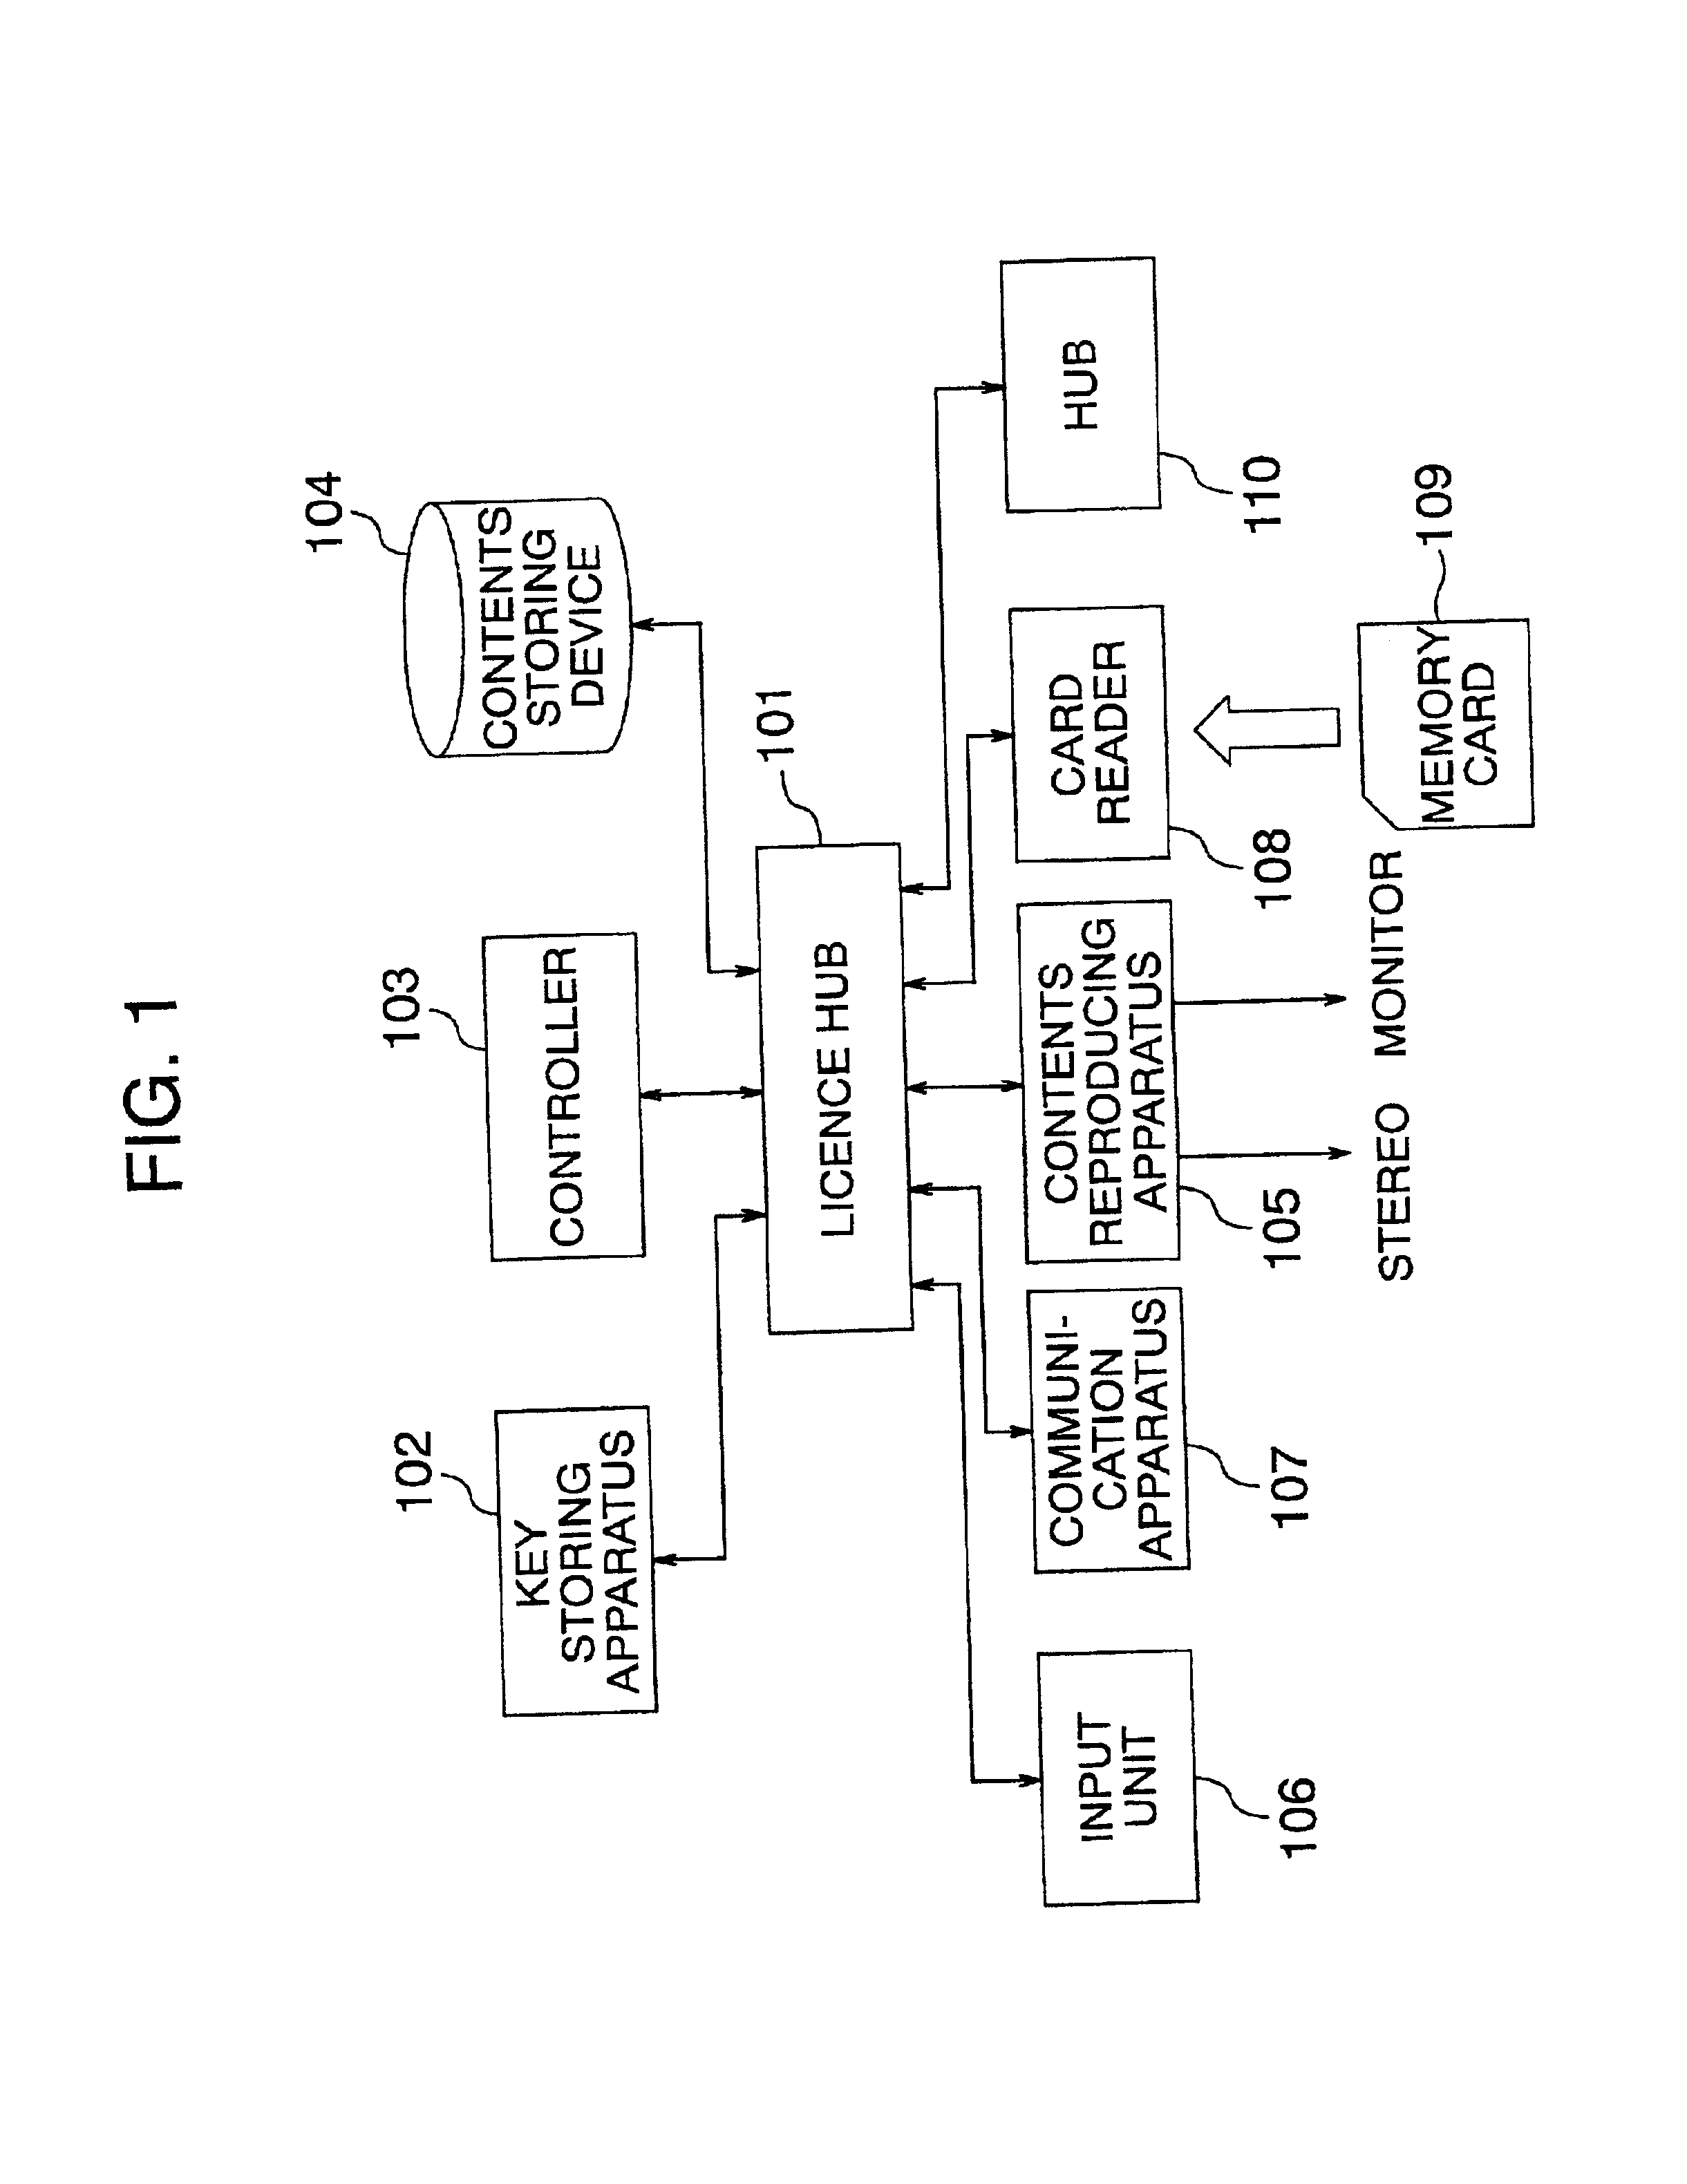 Hub apparatus with copyright protection function